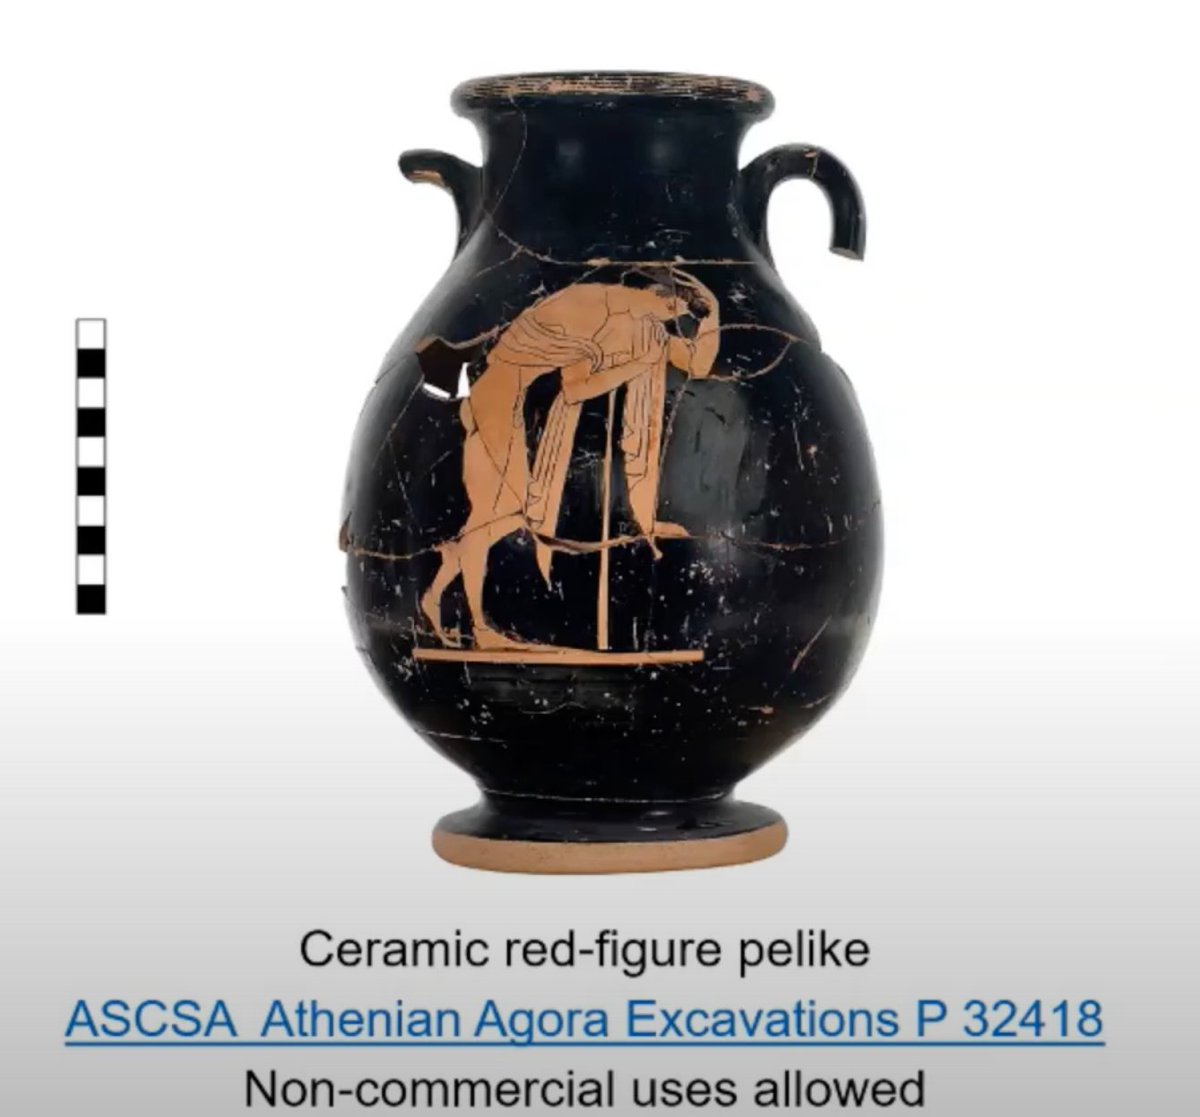 An example of narrative can be seen on this wine vessel. The monoscenic narrative is of a man vomiting from drinking too much wine. Scholars see this as caution because the Greeks warned about drinking too much, yet also ironic because it is on a drinking vessel (1). /4